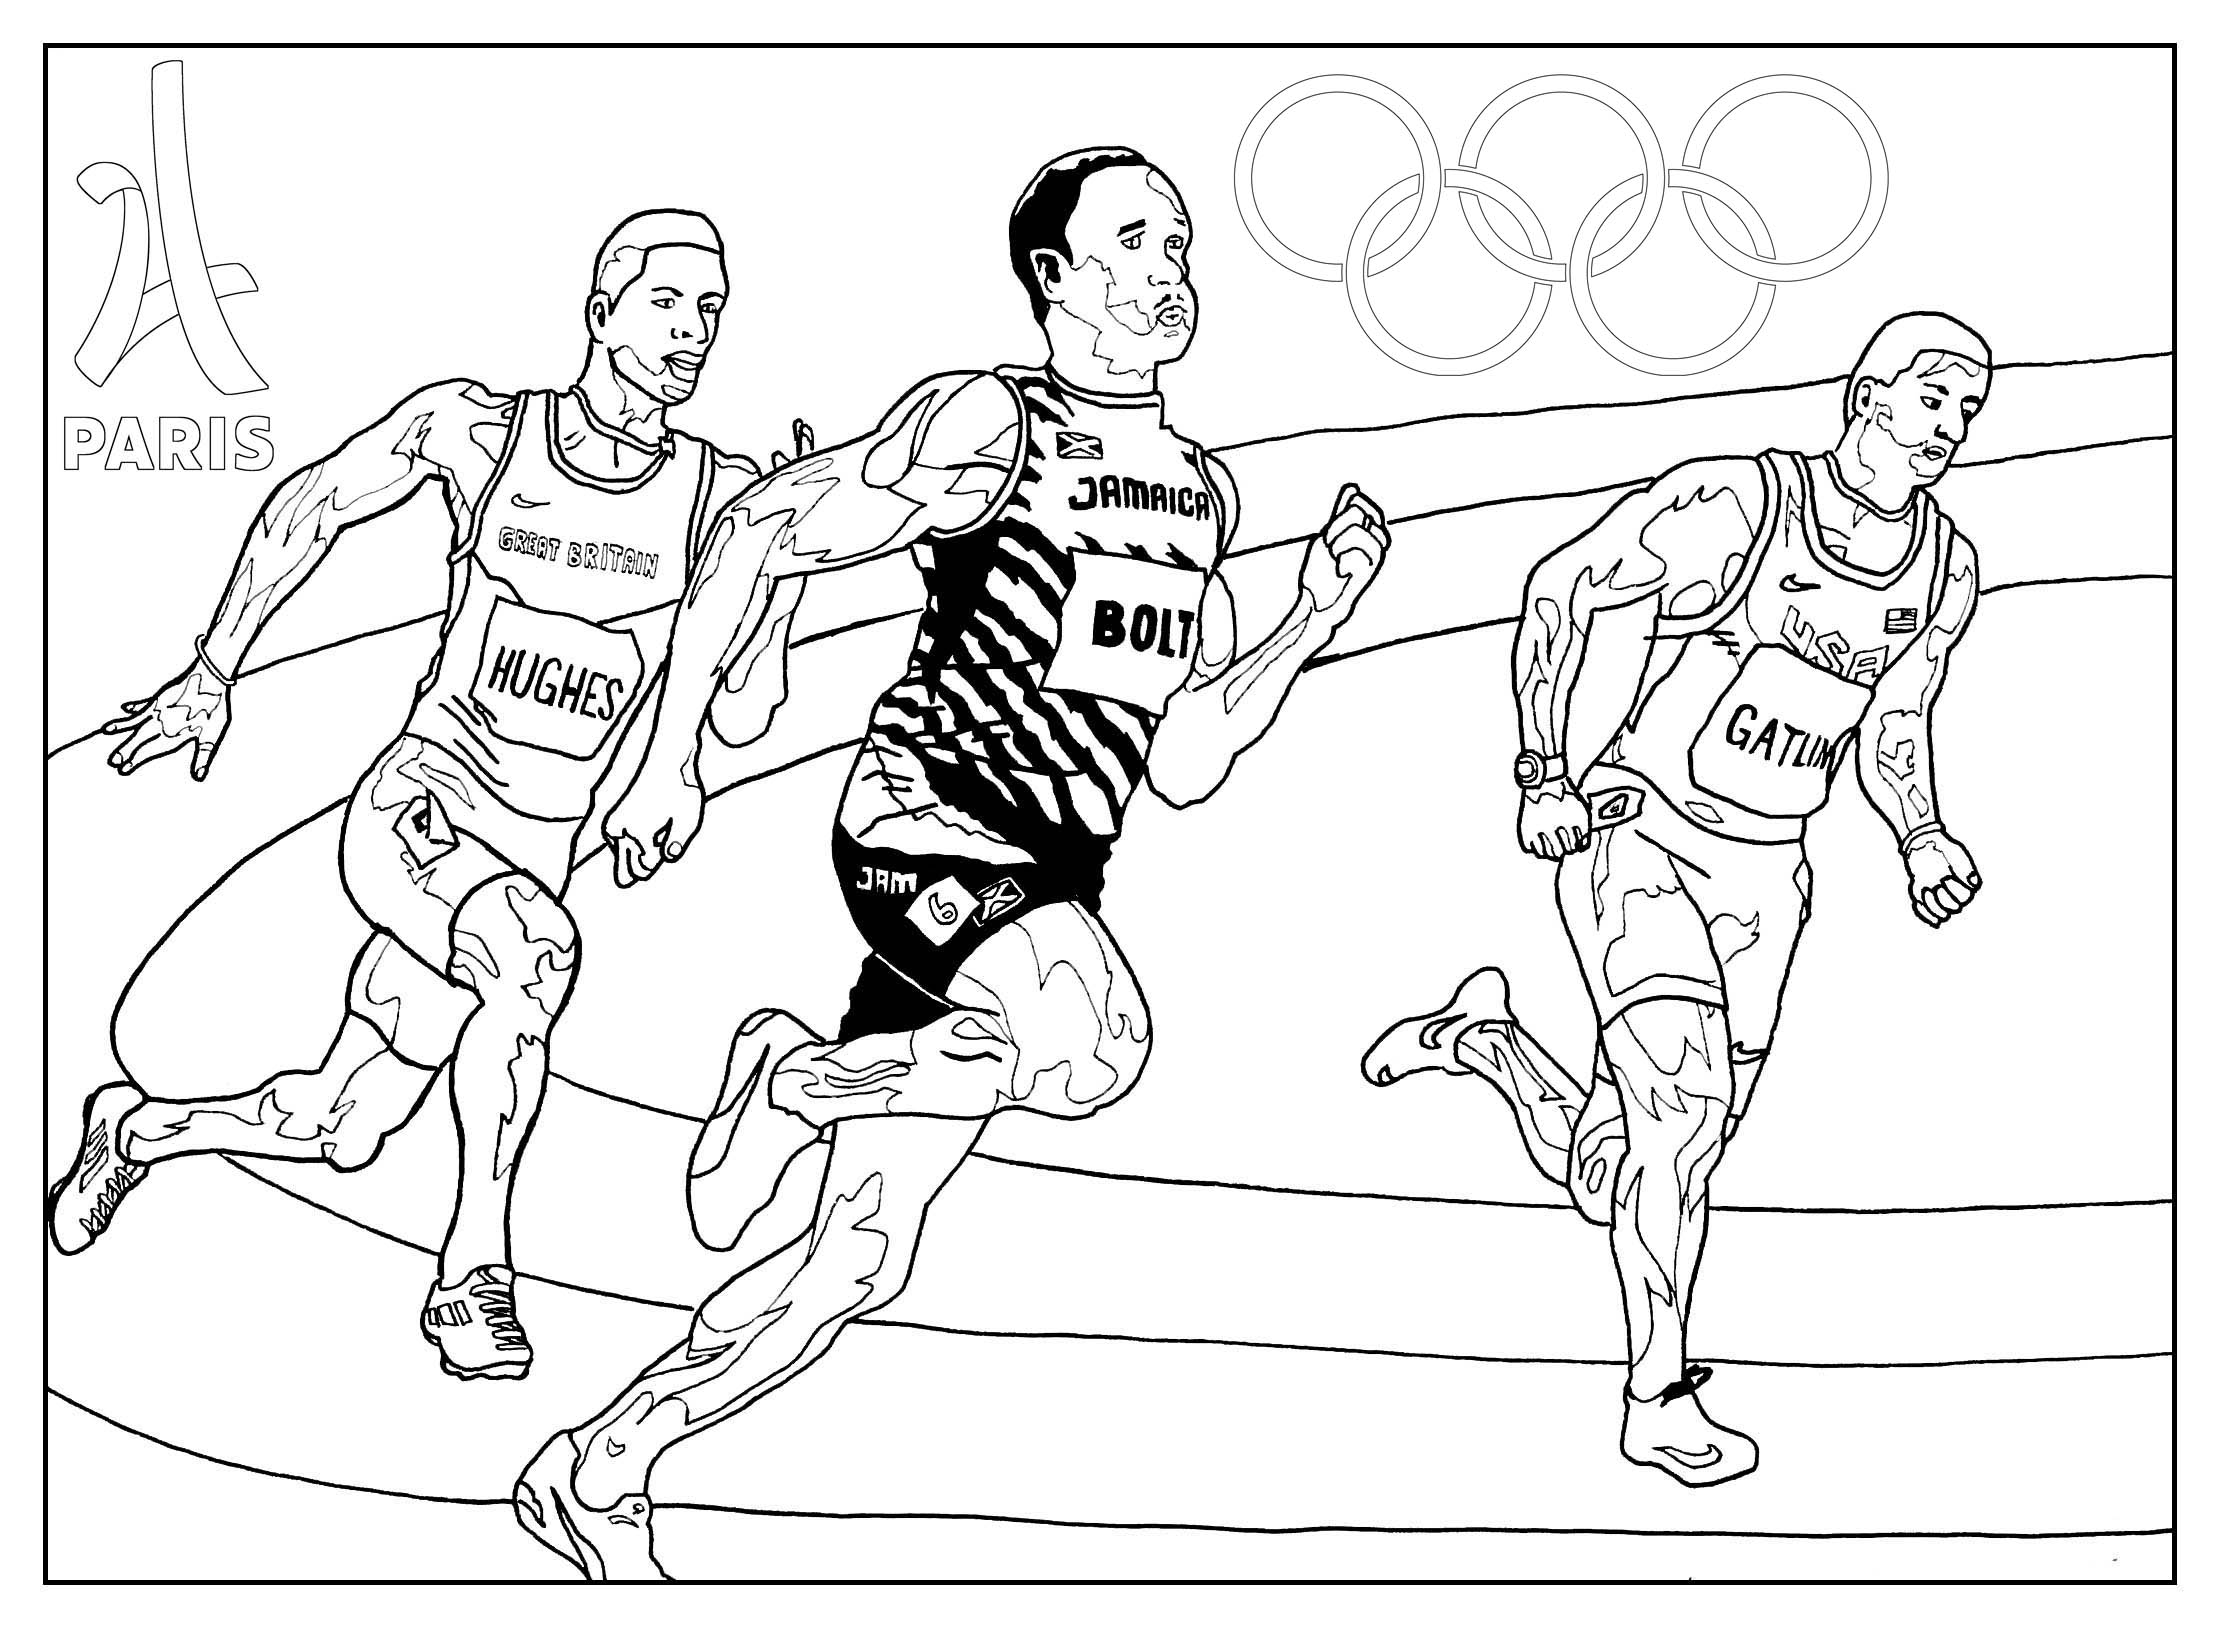 Olympic games for kids - Olympic Games Kids Coloring Pages